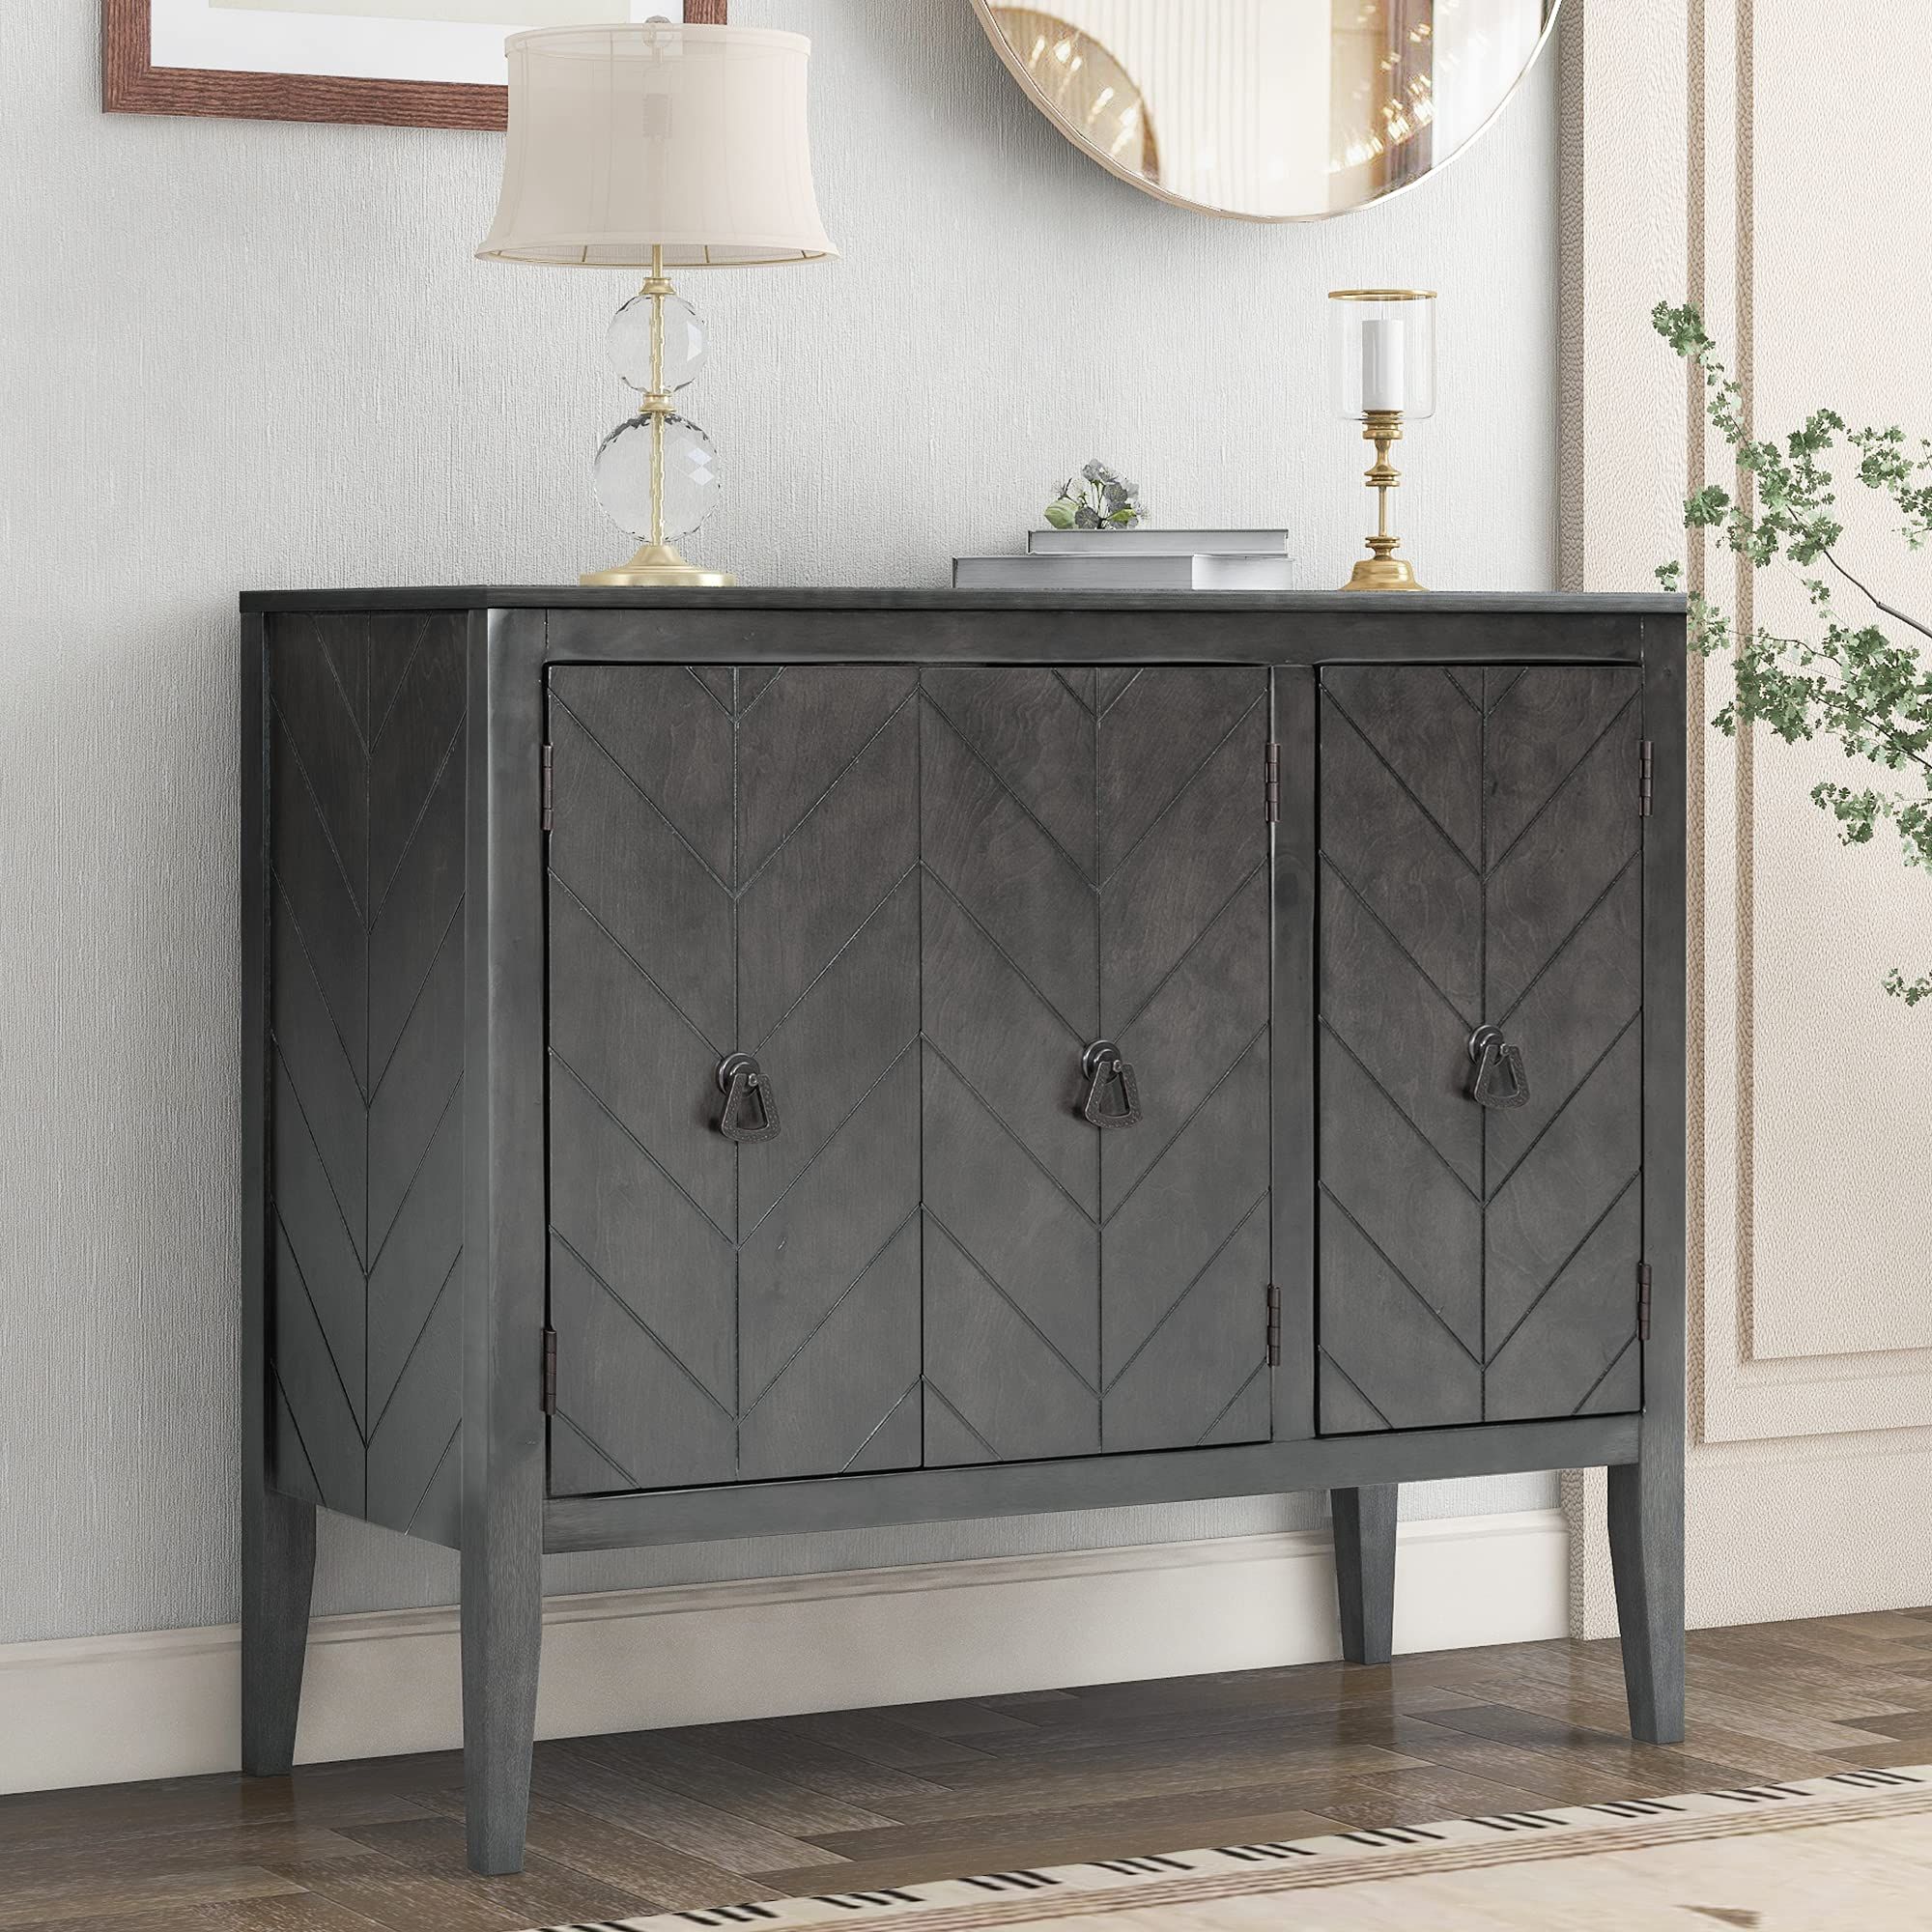 Popular Antique Storage Sideboards With Doors Intended For Amazon: Knocbel Antique Storage Cabinet With Doors And Adjustable  Shelf, Solid Wood Buffet Sideboard Entry Console Table For Living Room  Dining Room Kitchen, 37"lx15.7"wx31.5"h : Home & Kitchen (Photo 1 of 10)